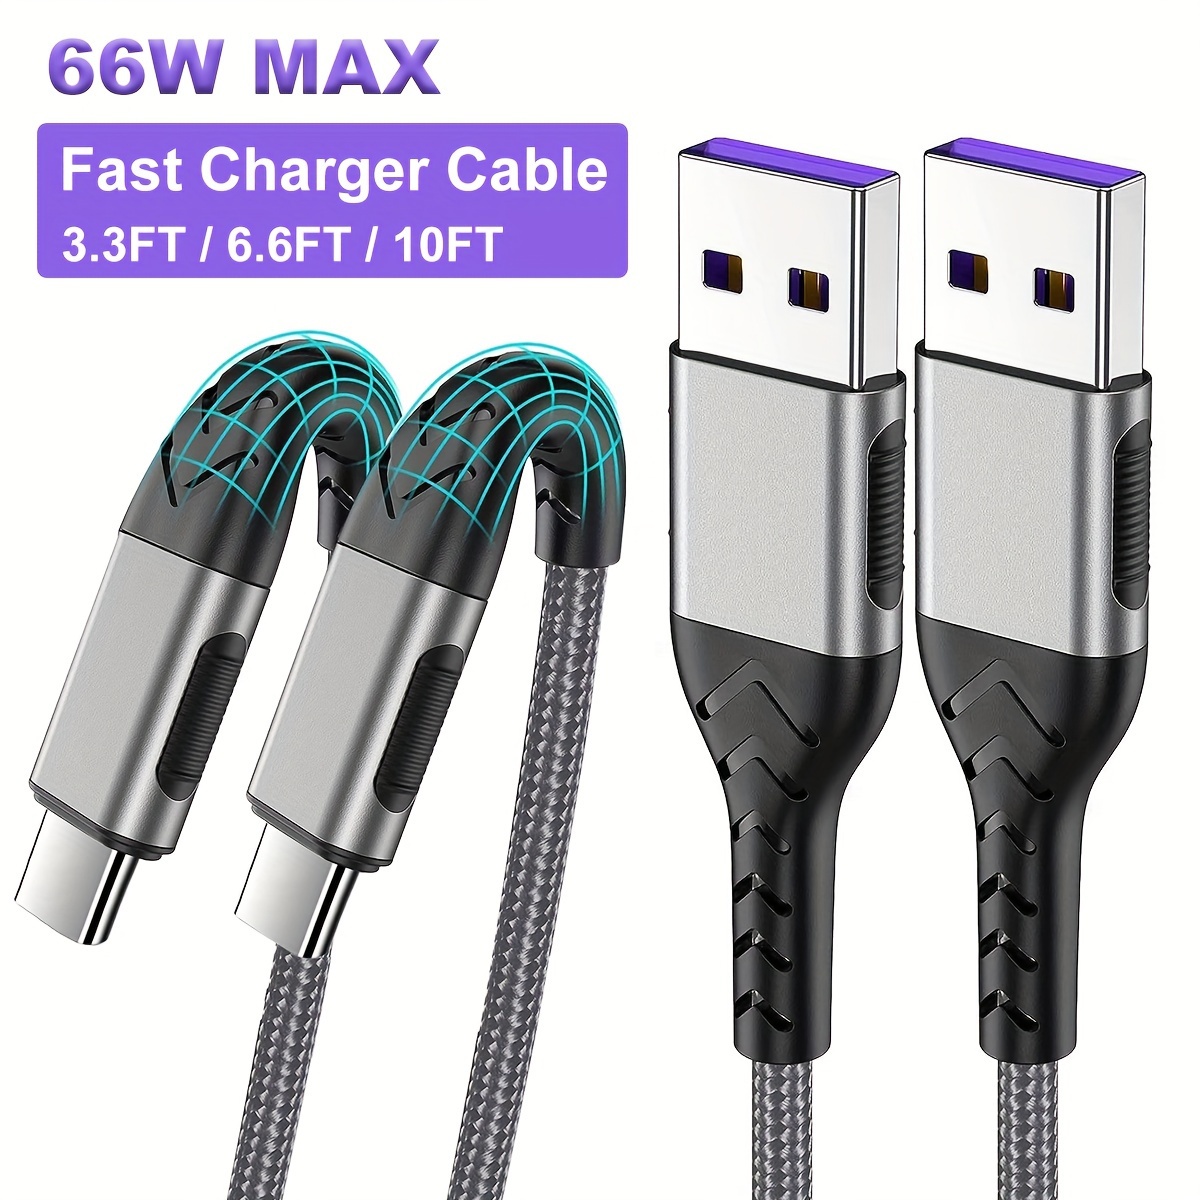 Multi 3 in 1 USB Long iPhone Charging Cable, 3M/10Ft Nylon Braided  Universal Phone Charger Cord USB C/Micro USB/Lightning Connector Adapter  for